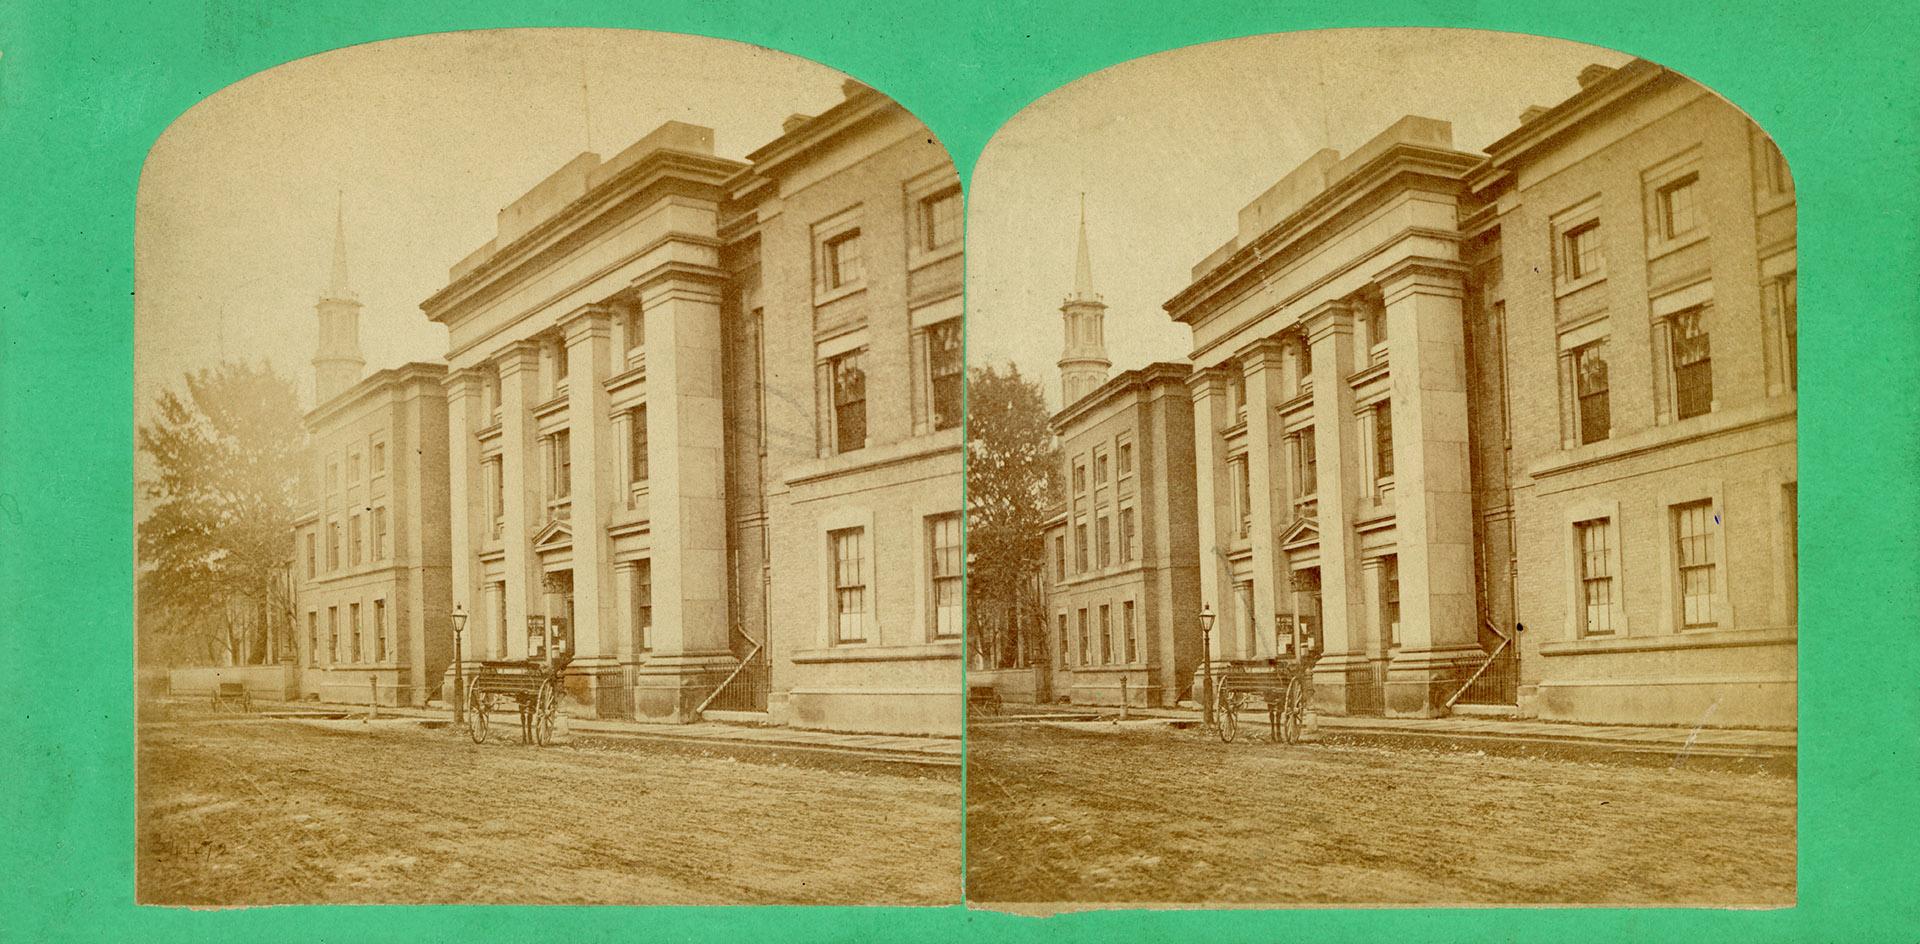 Pictures show a three story neo-classical building with a horse and cart in front of it.